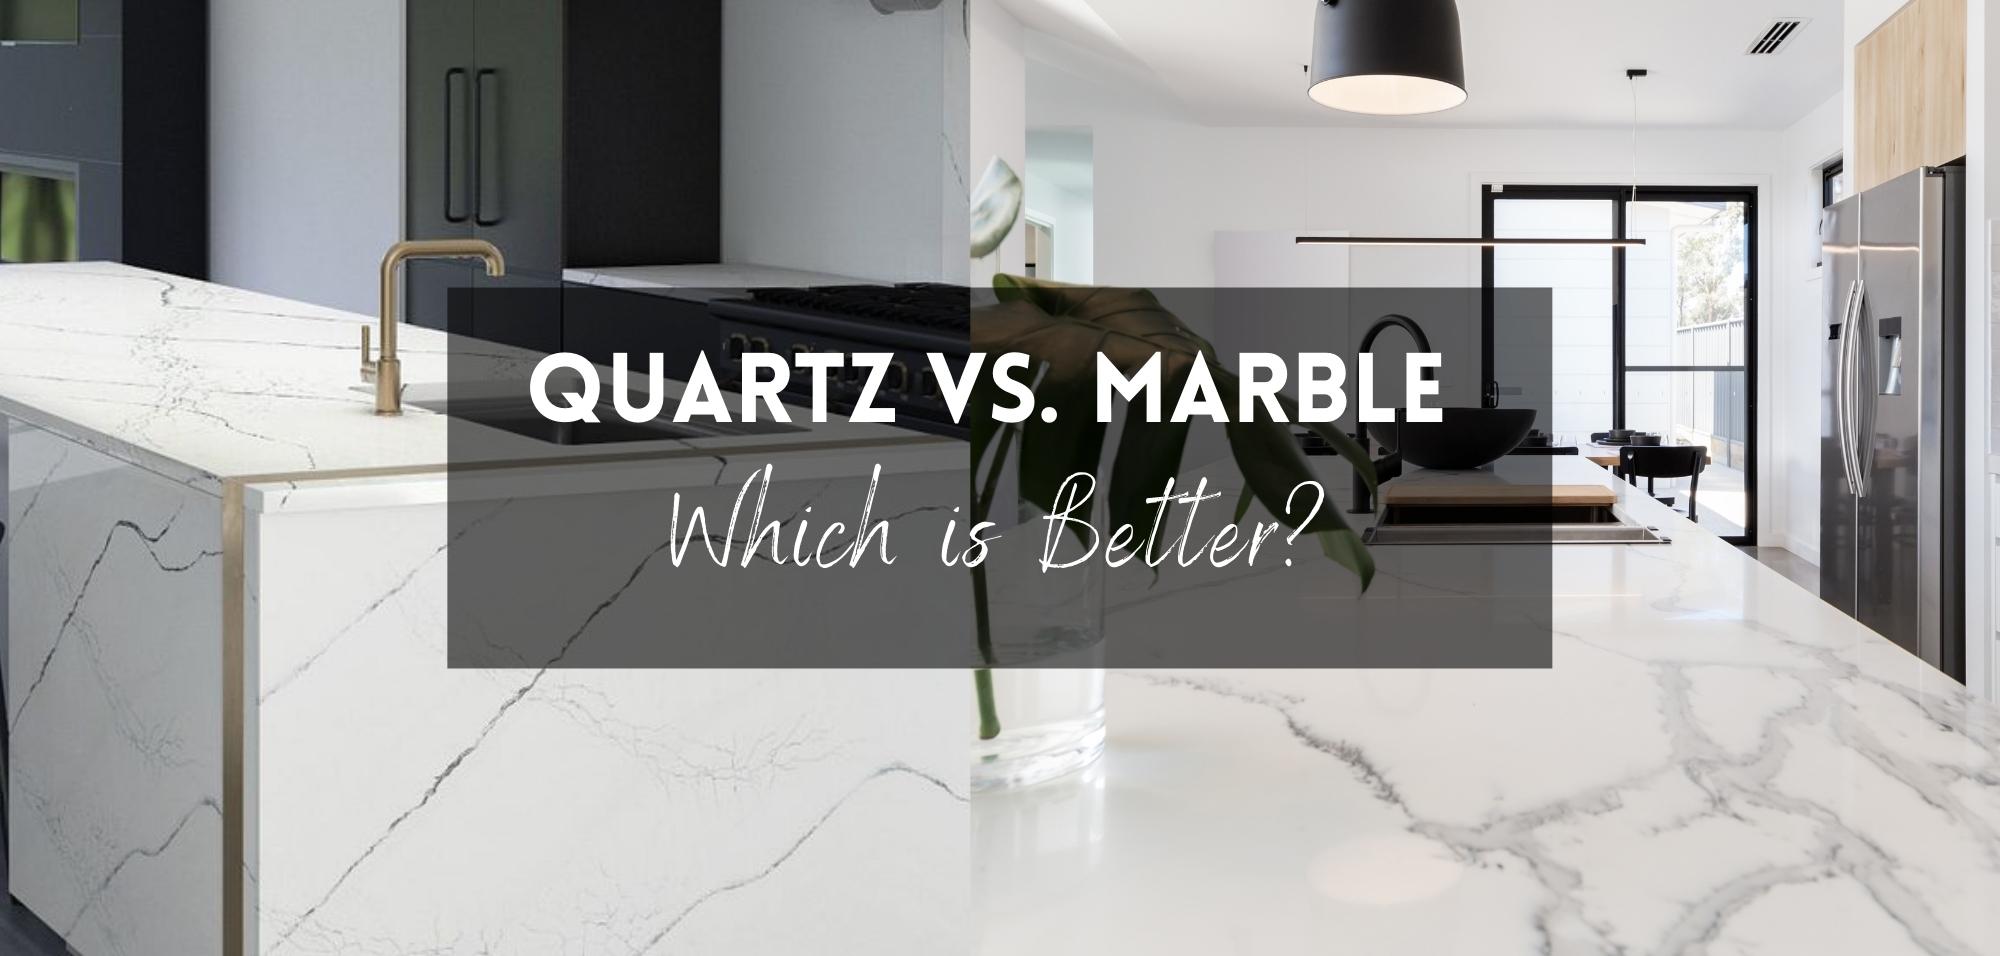 Quartz vs Marble Countertops which is better?